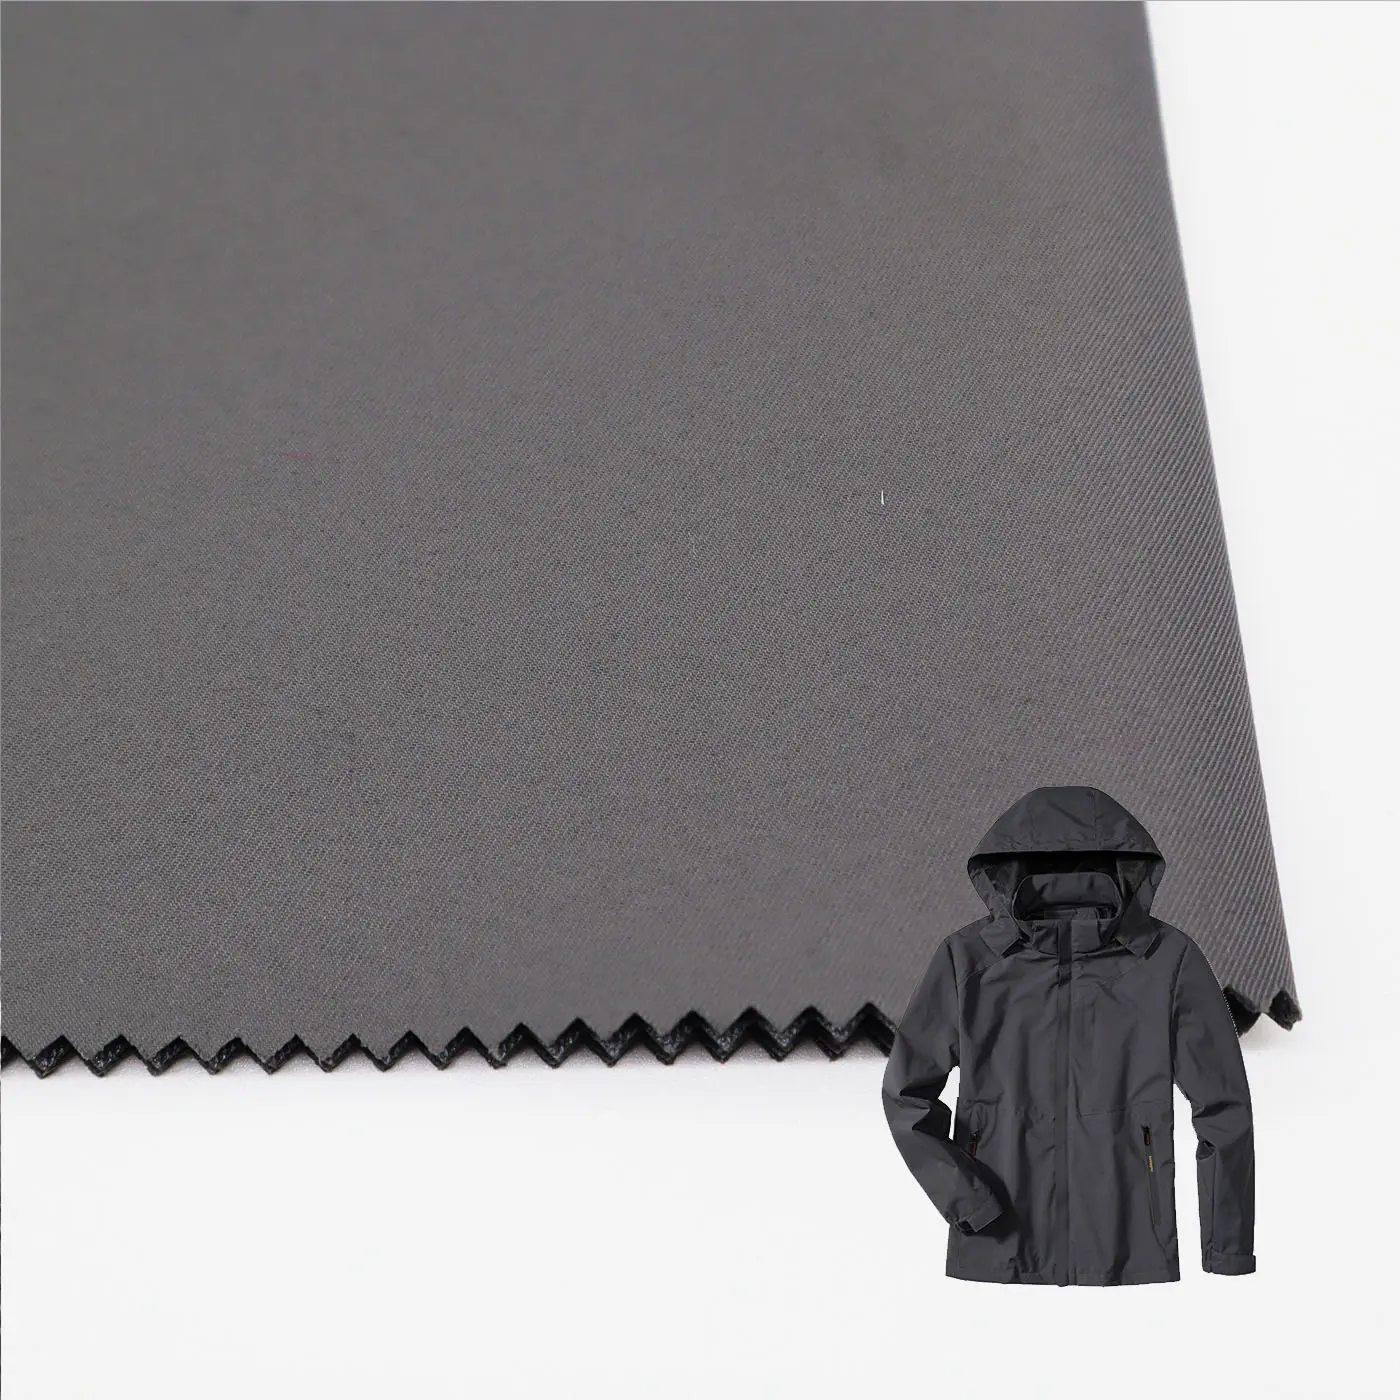 Exclusive discount 75D waterproof warp knitted laminated 100% polyester twill canopy outdoor clothing Oxford fabric